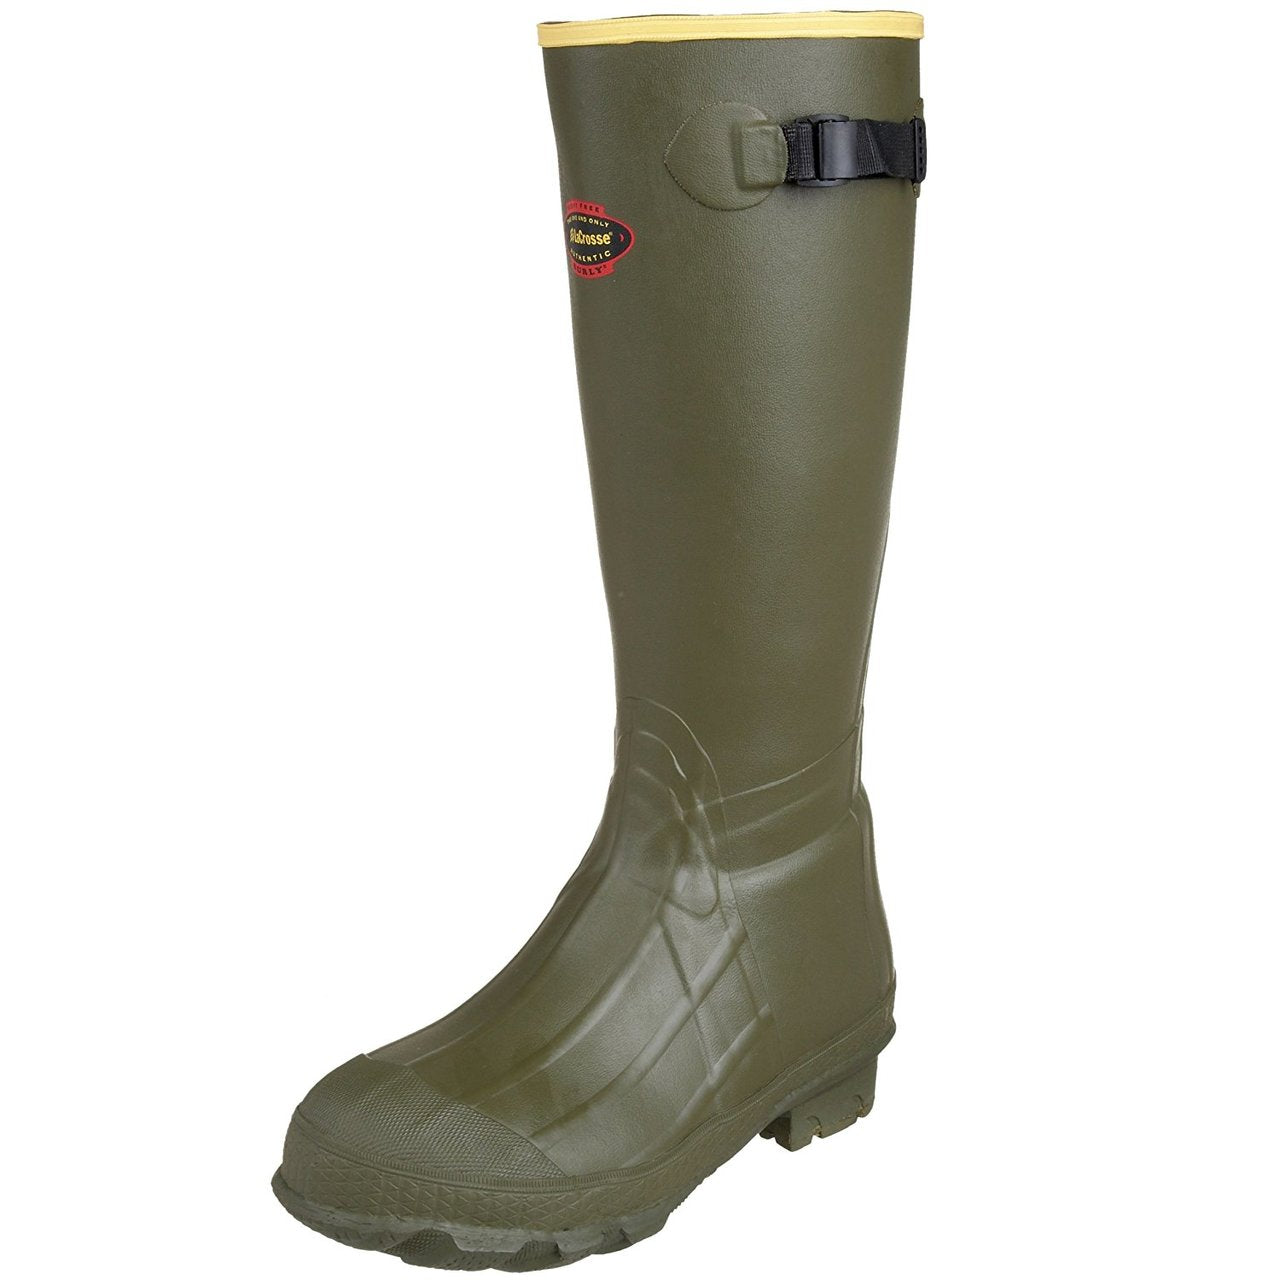 LaCrosse Burly Classic Hunting Boots 18" Insulated